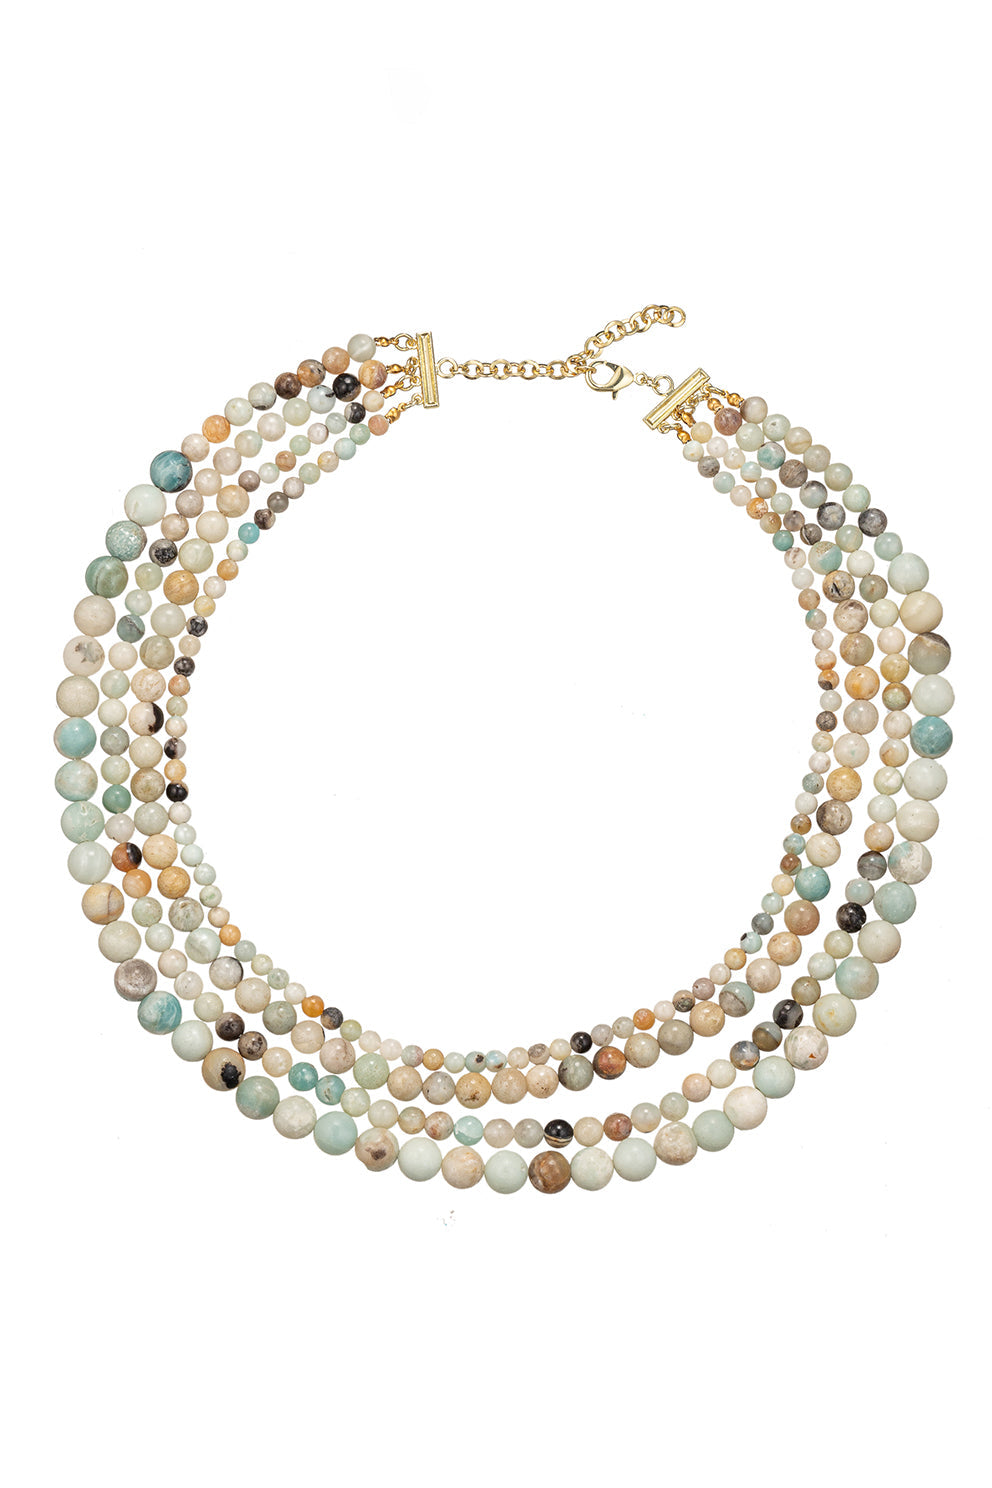 A multi-strand necklace adorned with amazonite agate beads, offering a vibrant and stylish look.